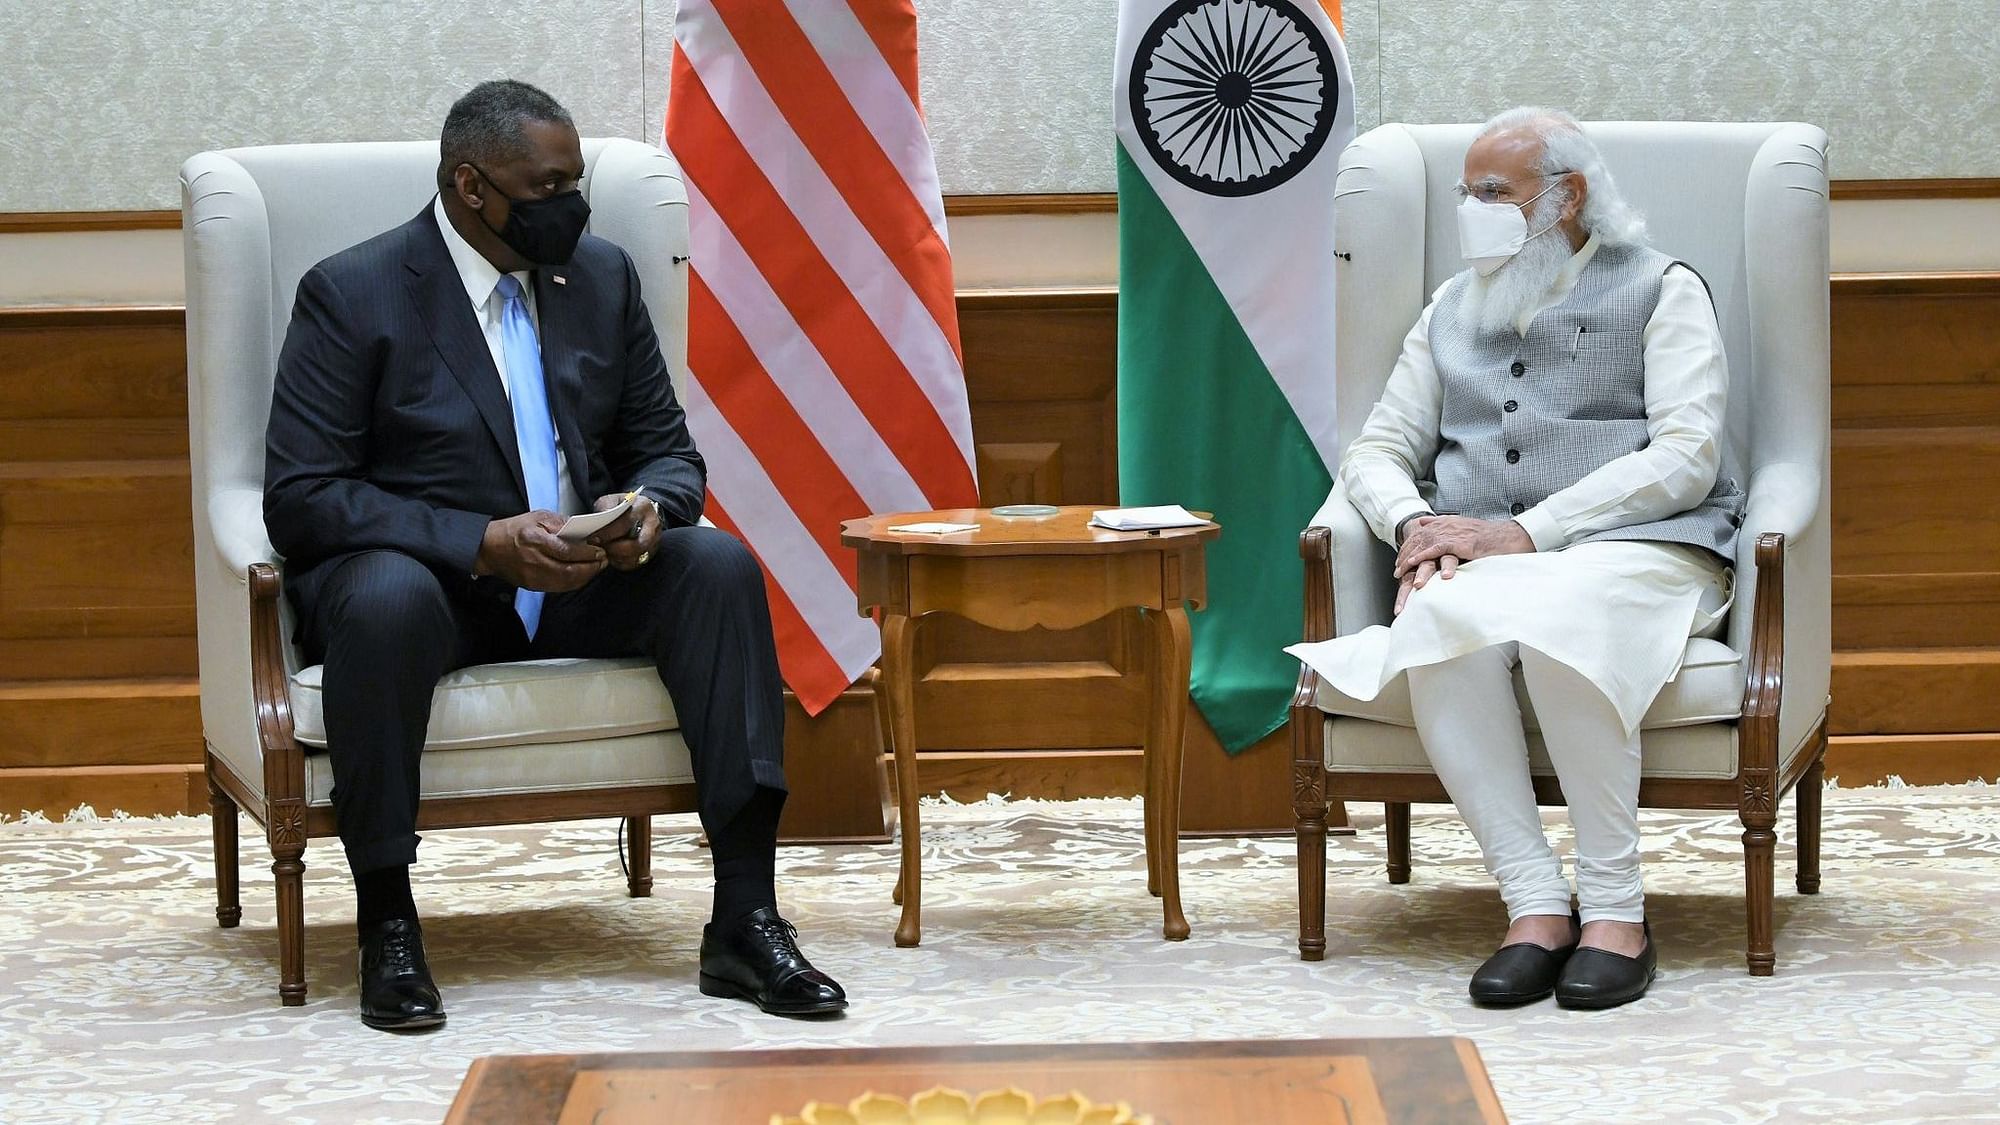 Prime Minister Narendra Modi on Friday, 19 March, met United States (US) Secretary of Defence Lloyd Austin and conveyed his best wishes for US President Joe Biden.